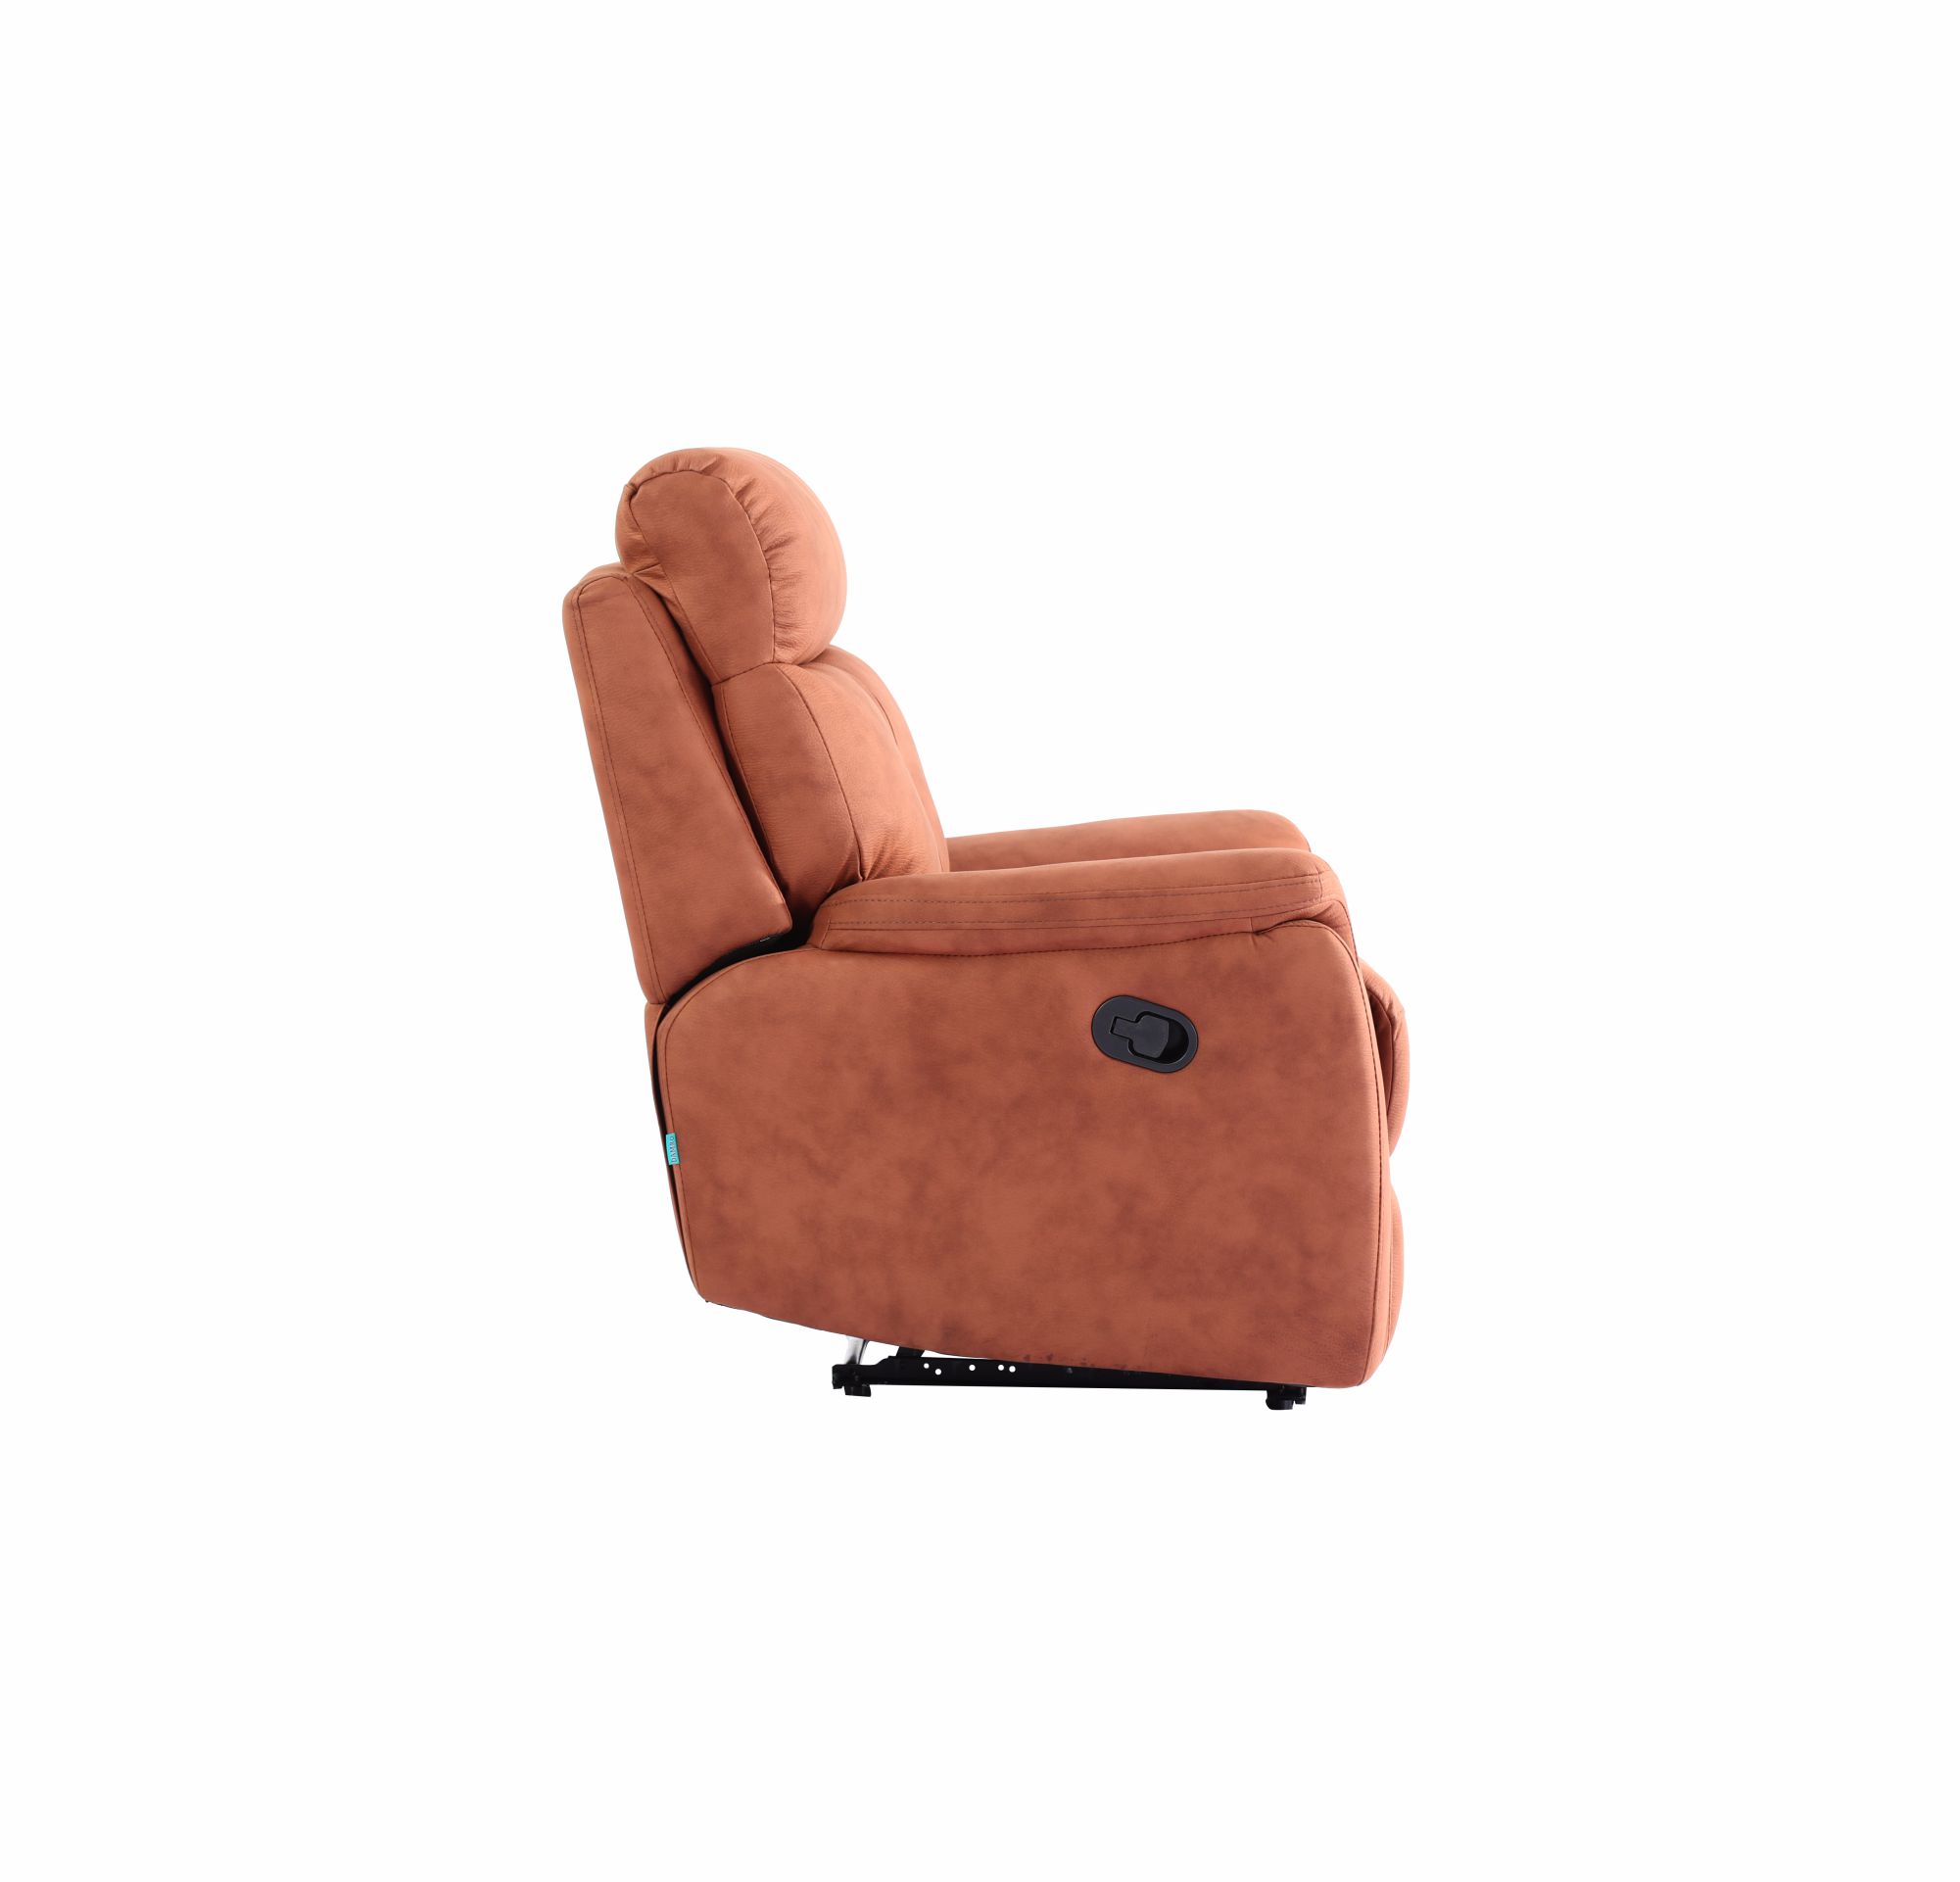 SAC001R-Alicia Sofa 1 Seater With Recliner-NZ02